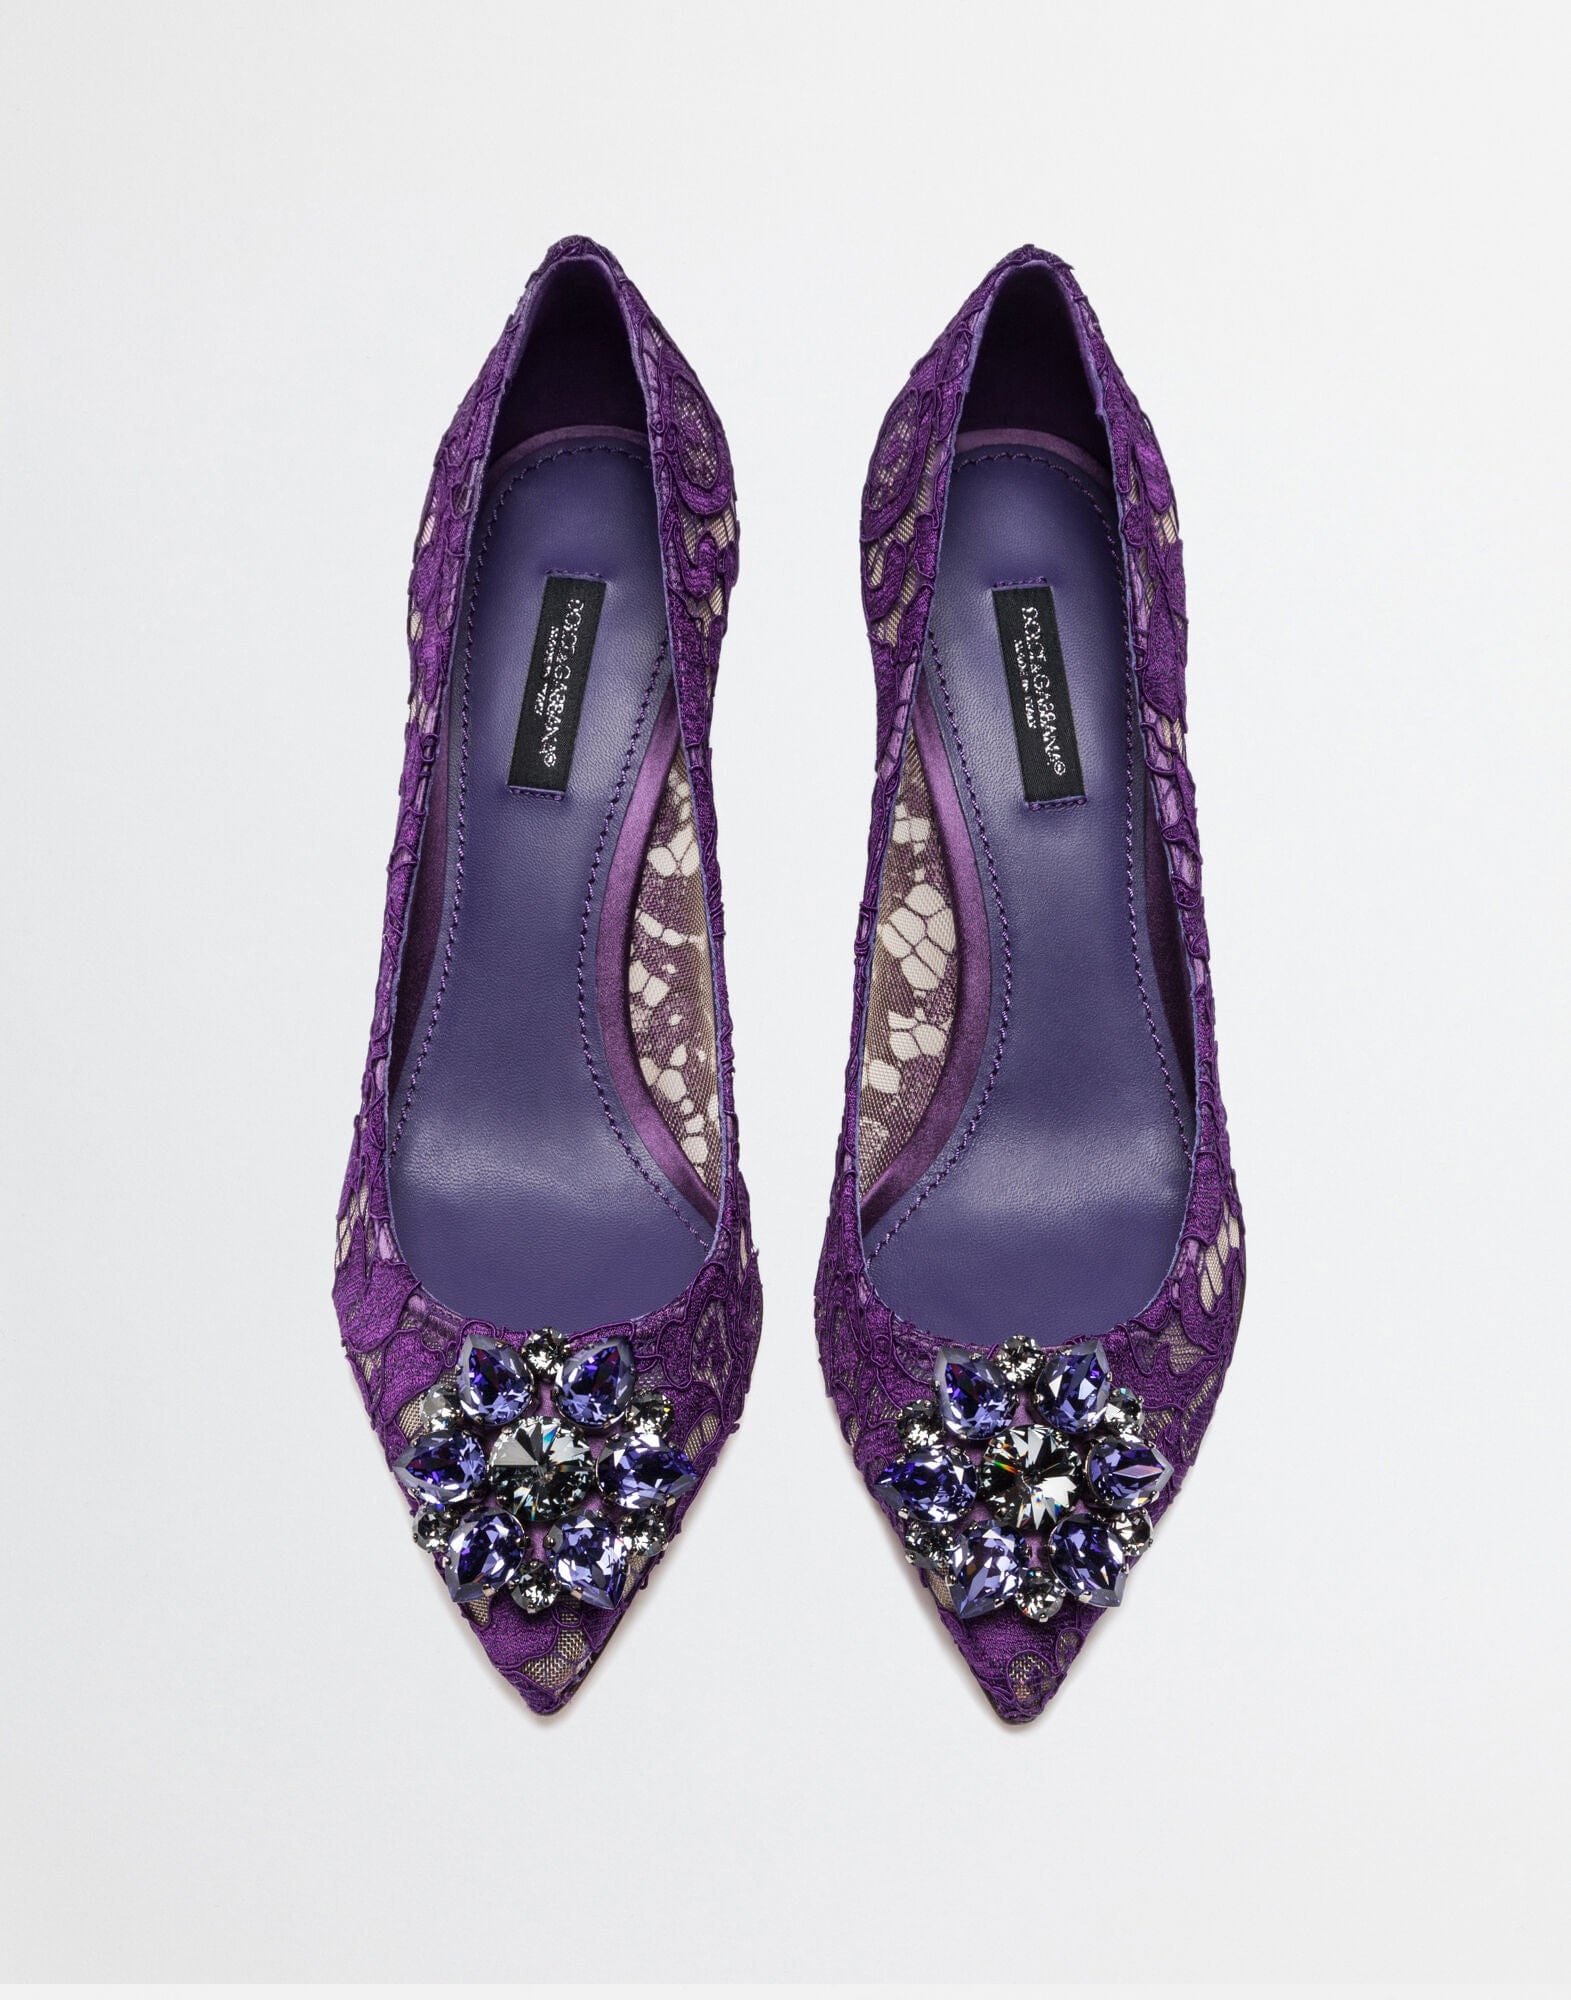 Dolce & Gabbana Lace Rainbow Pumps With Brooch Detailing